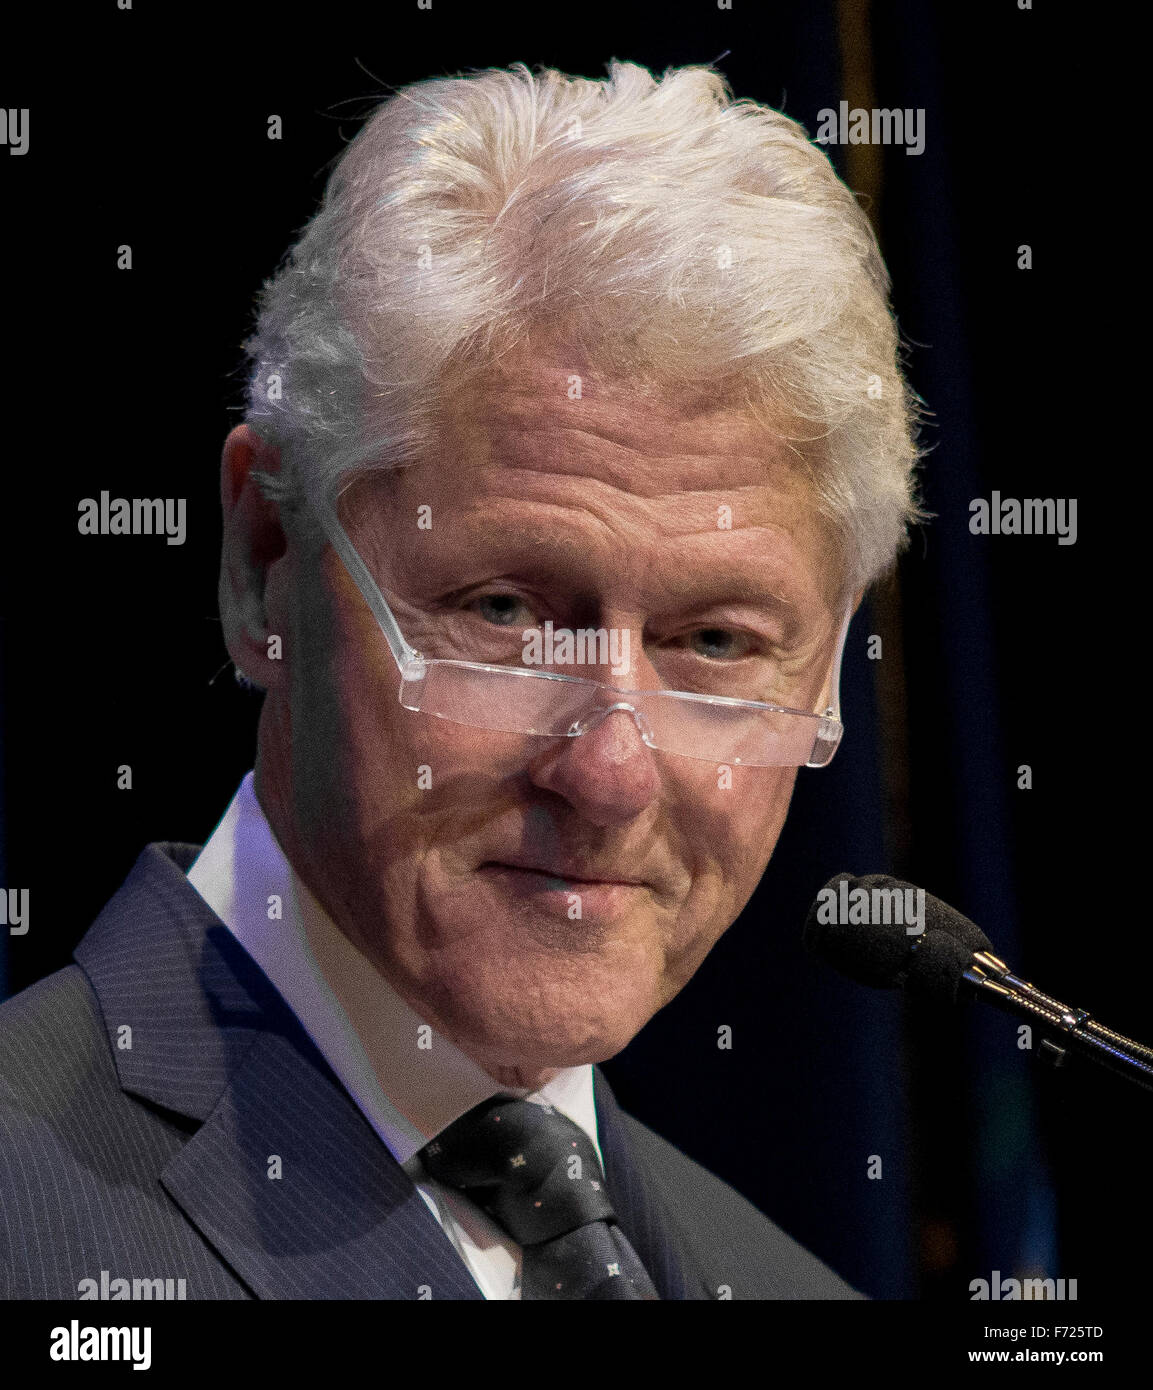 Lawrence, Kansas. 23rd Nov, 2015. Former President William Jefferson Clinton is awarded the Robert J. Dole Institute of Politics Leadership Prize. President Clinton is honored with the award for his legacy of bipartisanship and economic expansion while serving as the nations 42nd president. Credit: Credit:  mark reinstein/Alamy Live News Stock Photo